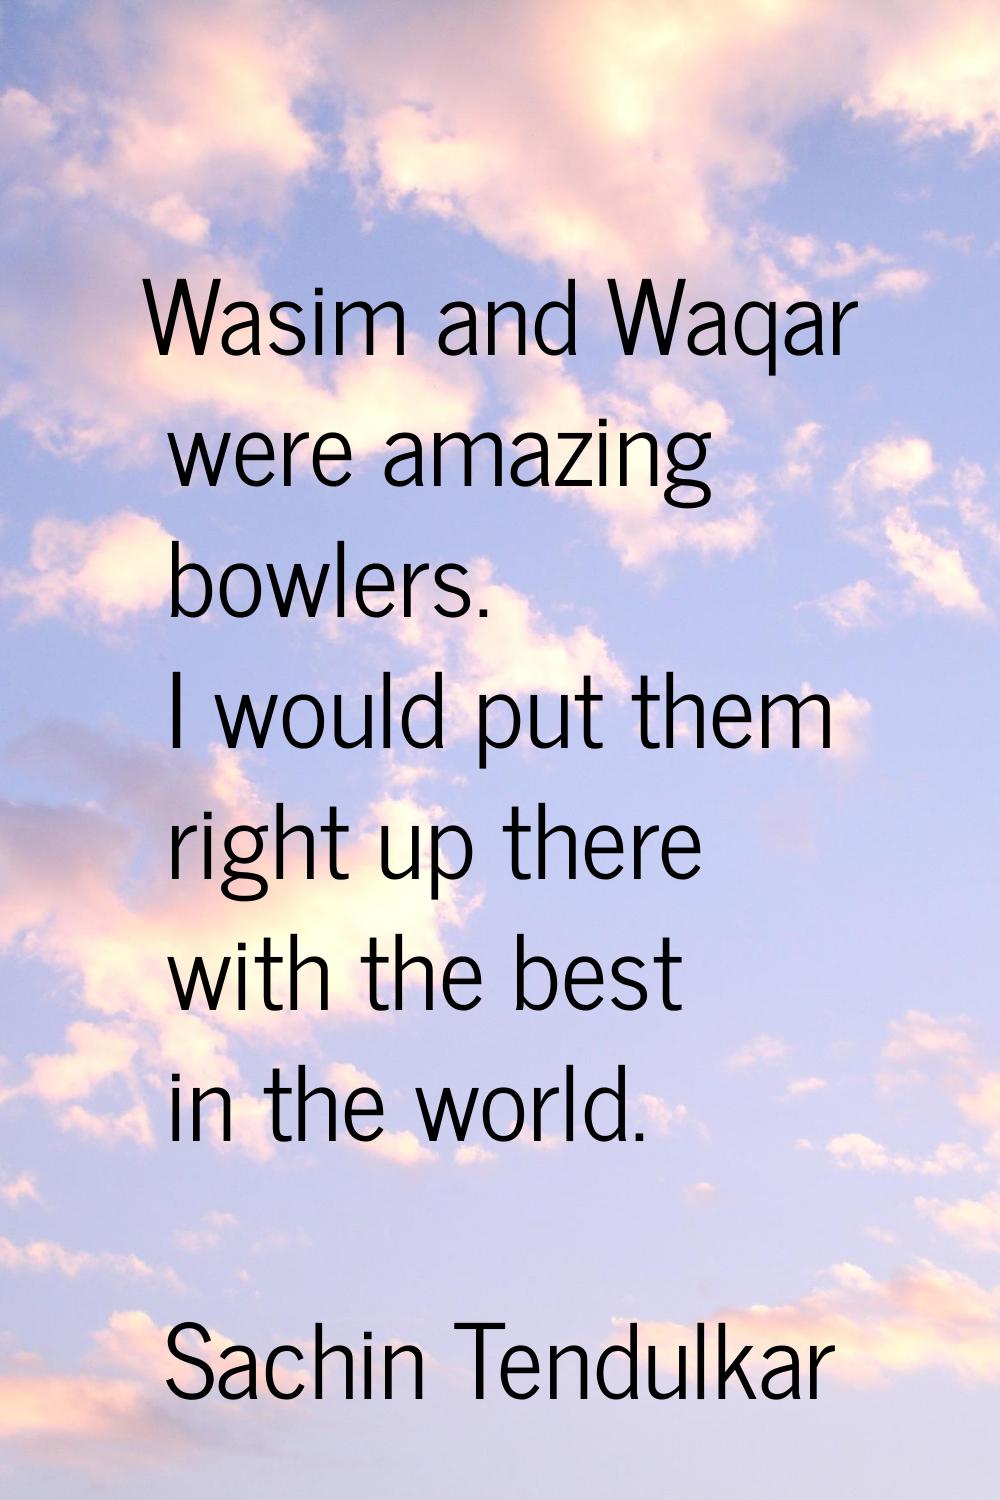 Wasim and Waqar were amazing bowlers. I would put them right up there with the best in the world.